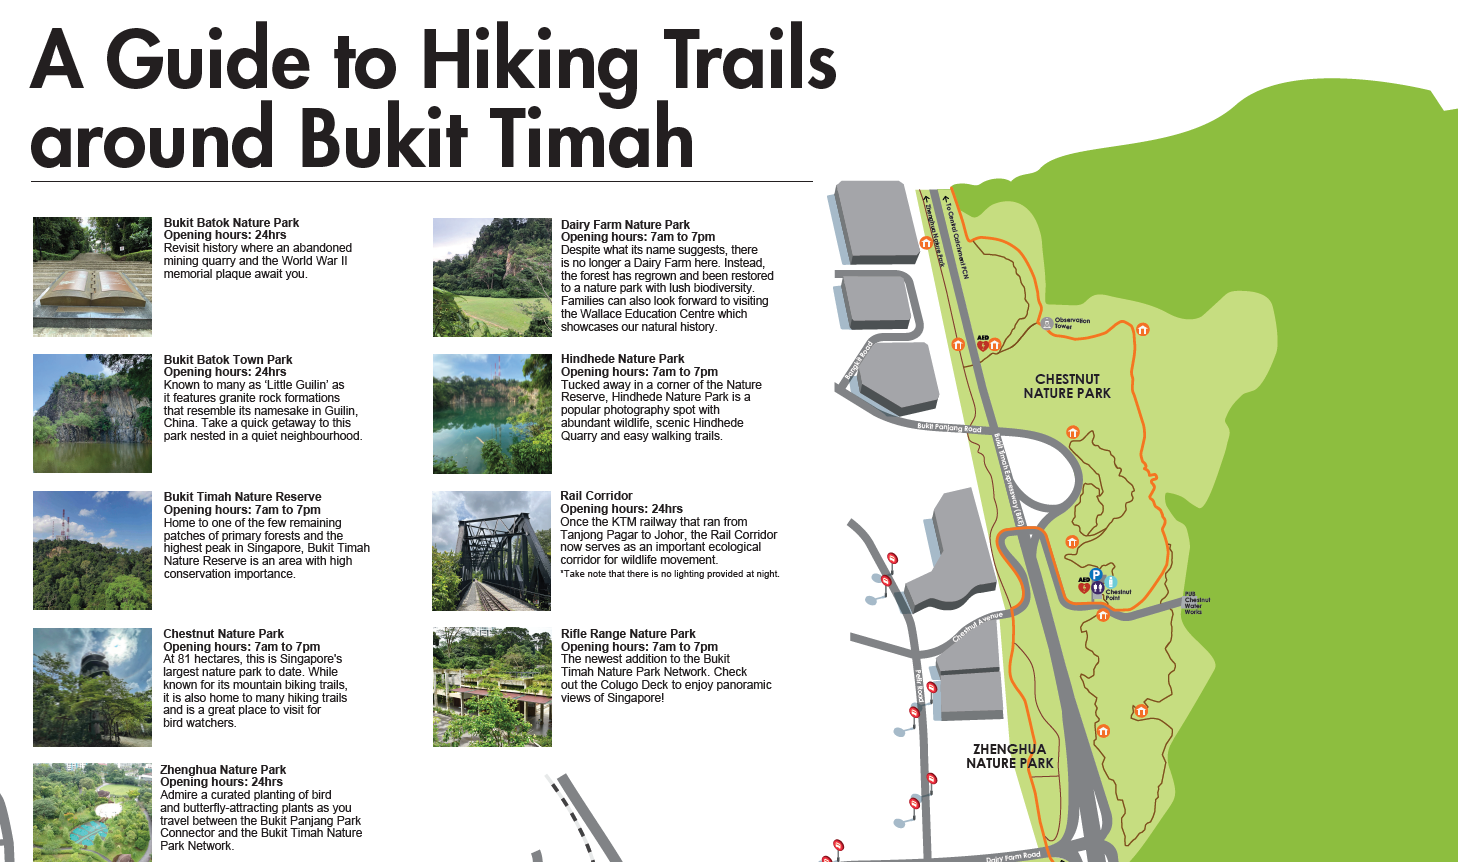 A Guide to Hiking Trails around Bukit Timah